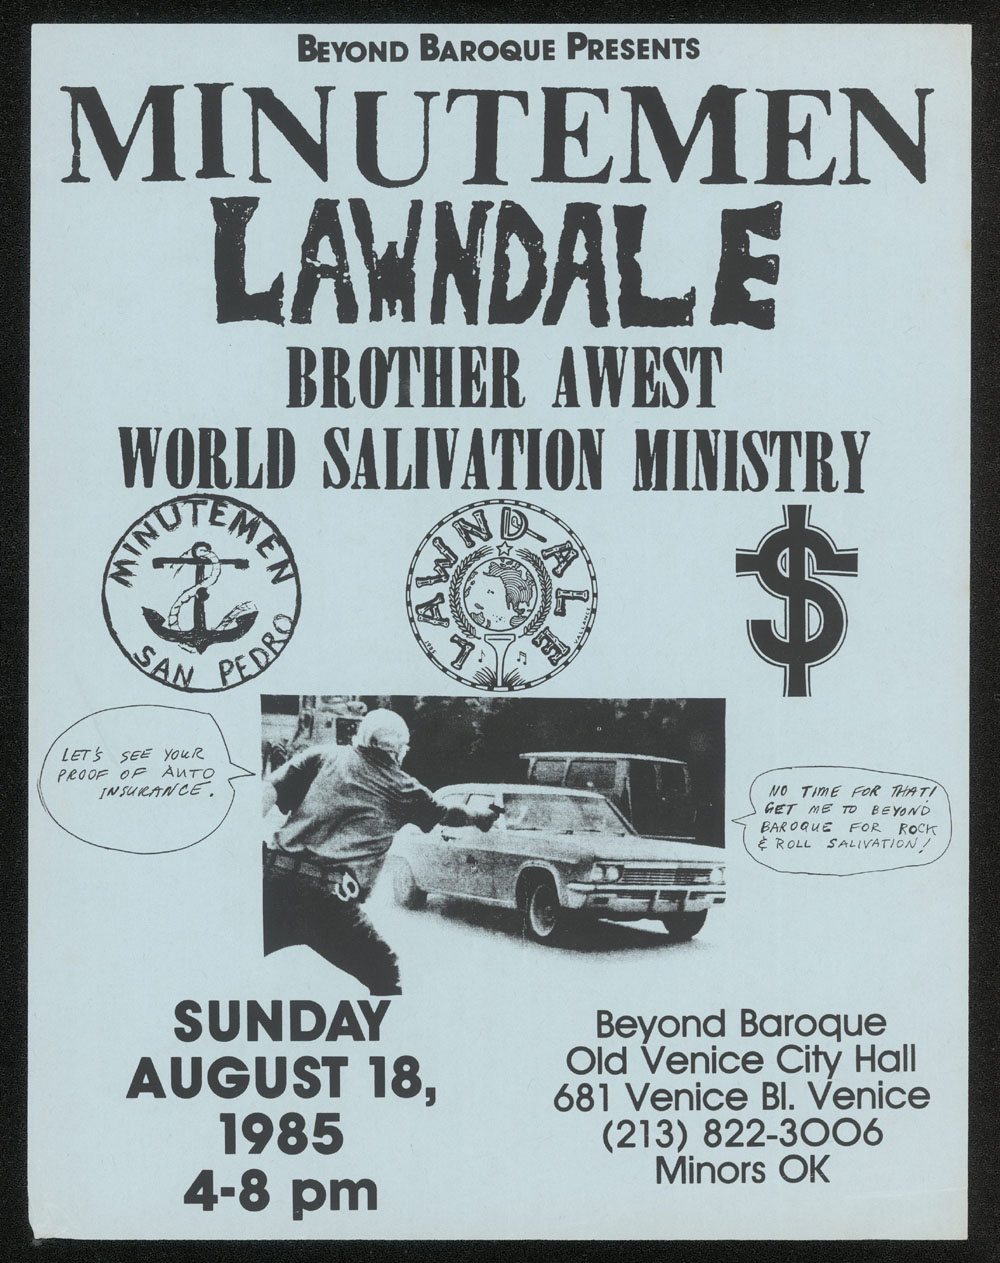 MINUTEMEN w/ Lawndale, Brother Awest, World Salivation Ministry at Beyond Baroque